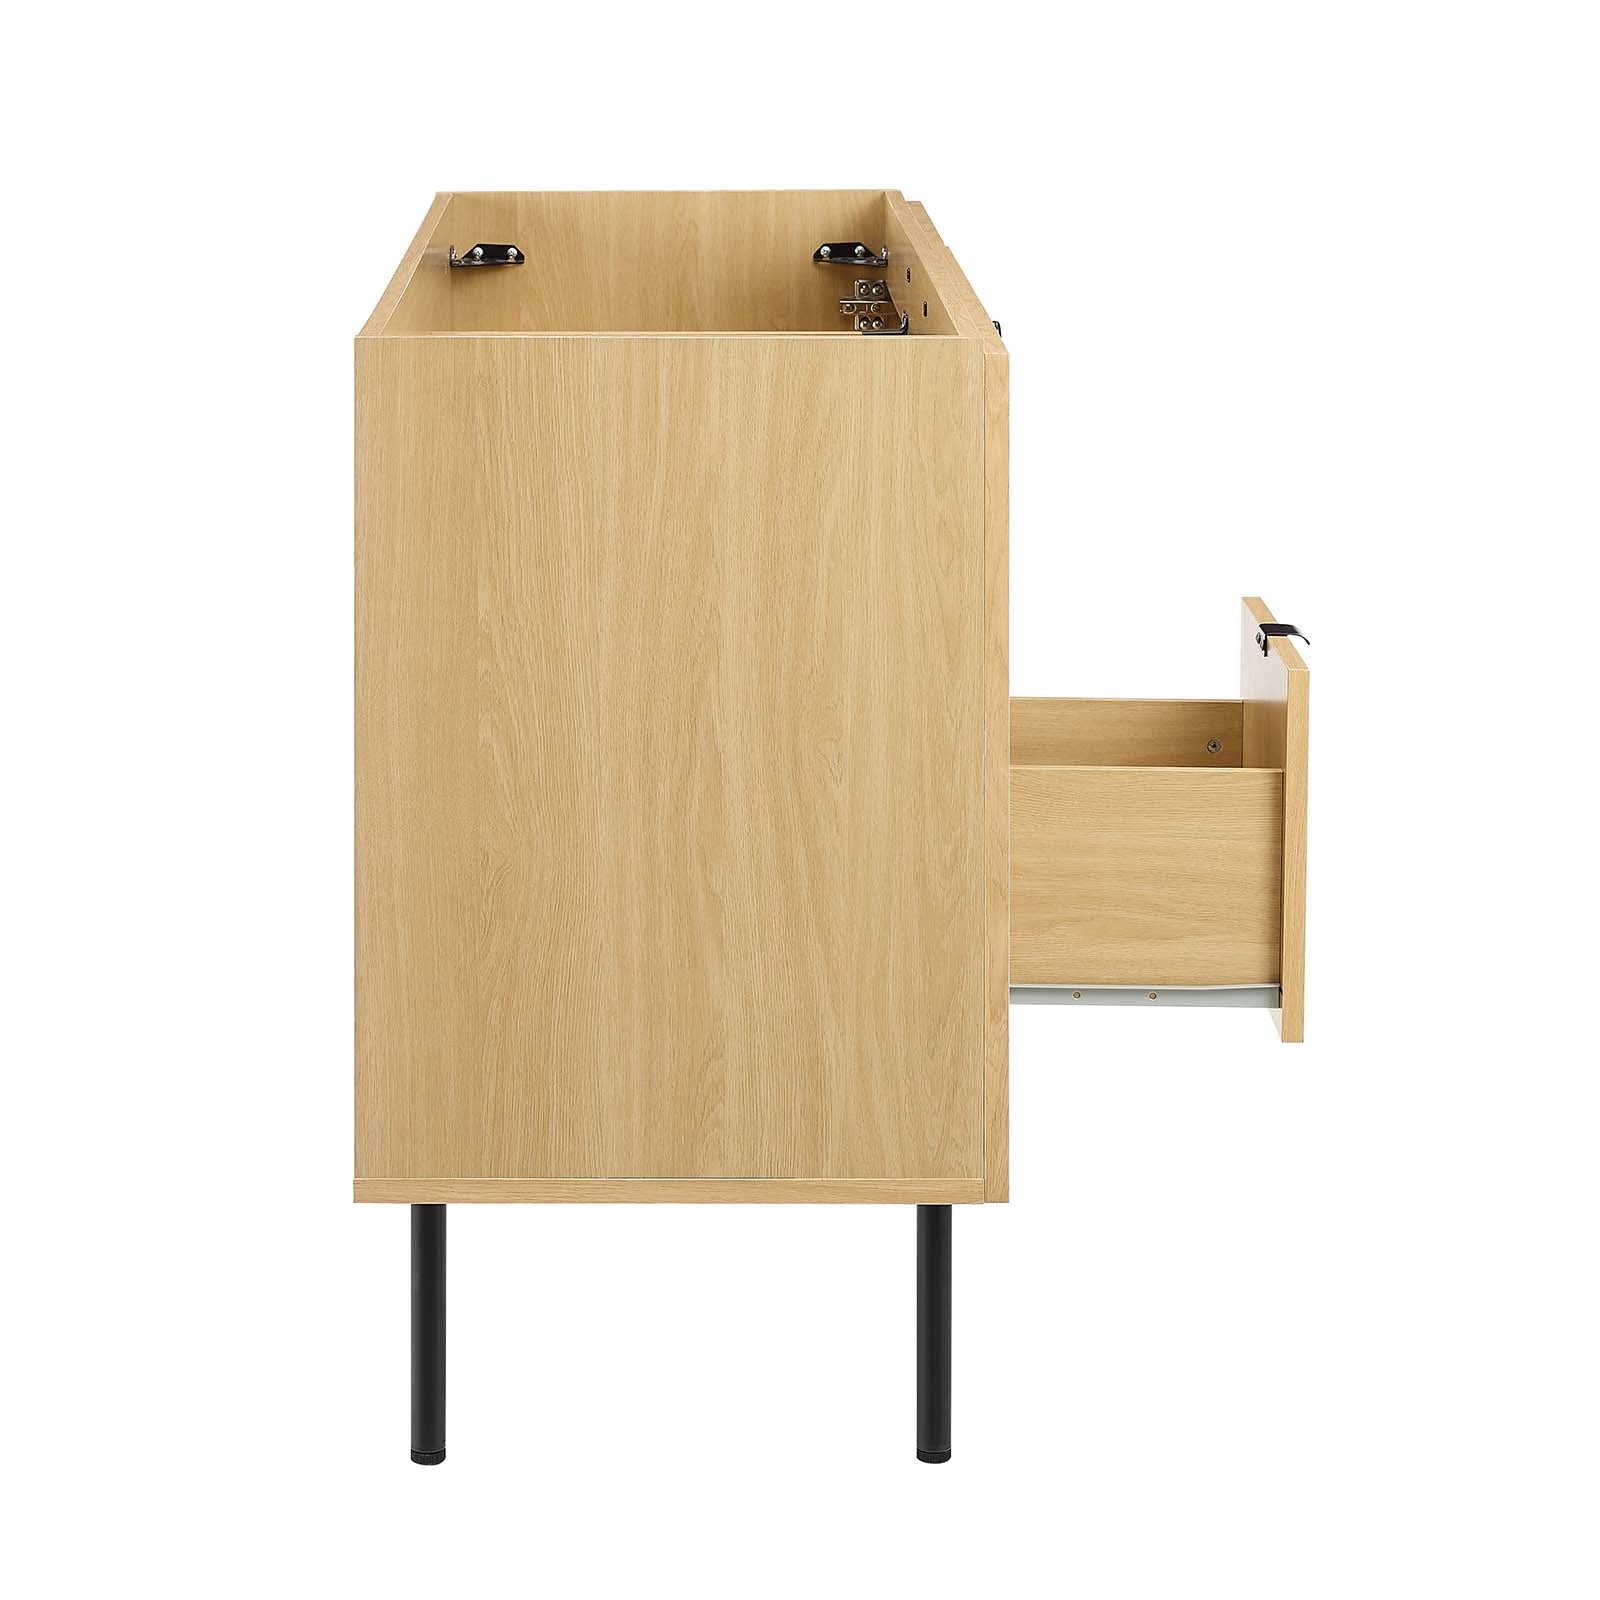 Chaucer 48" Bathroom Vanity Cabinet (Sink Basin Not Included) - East Shore Modern Home Furnishings